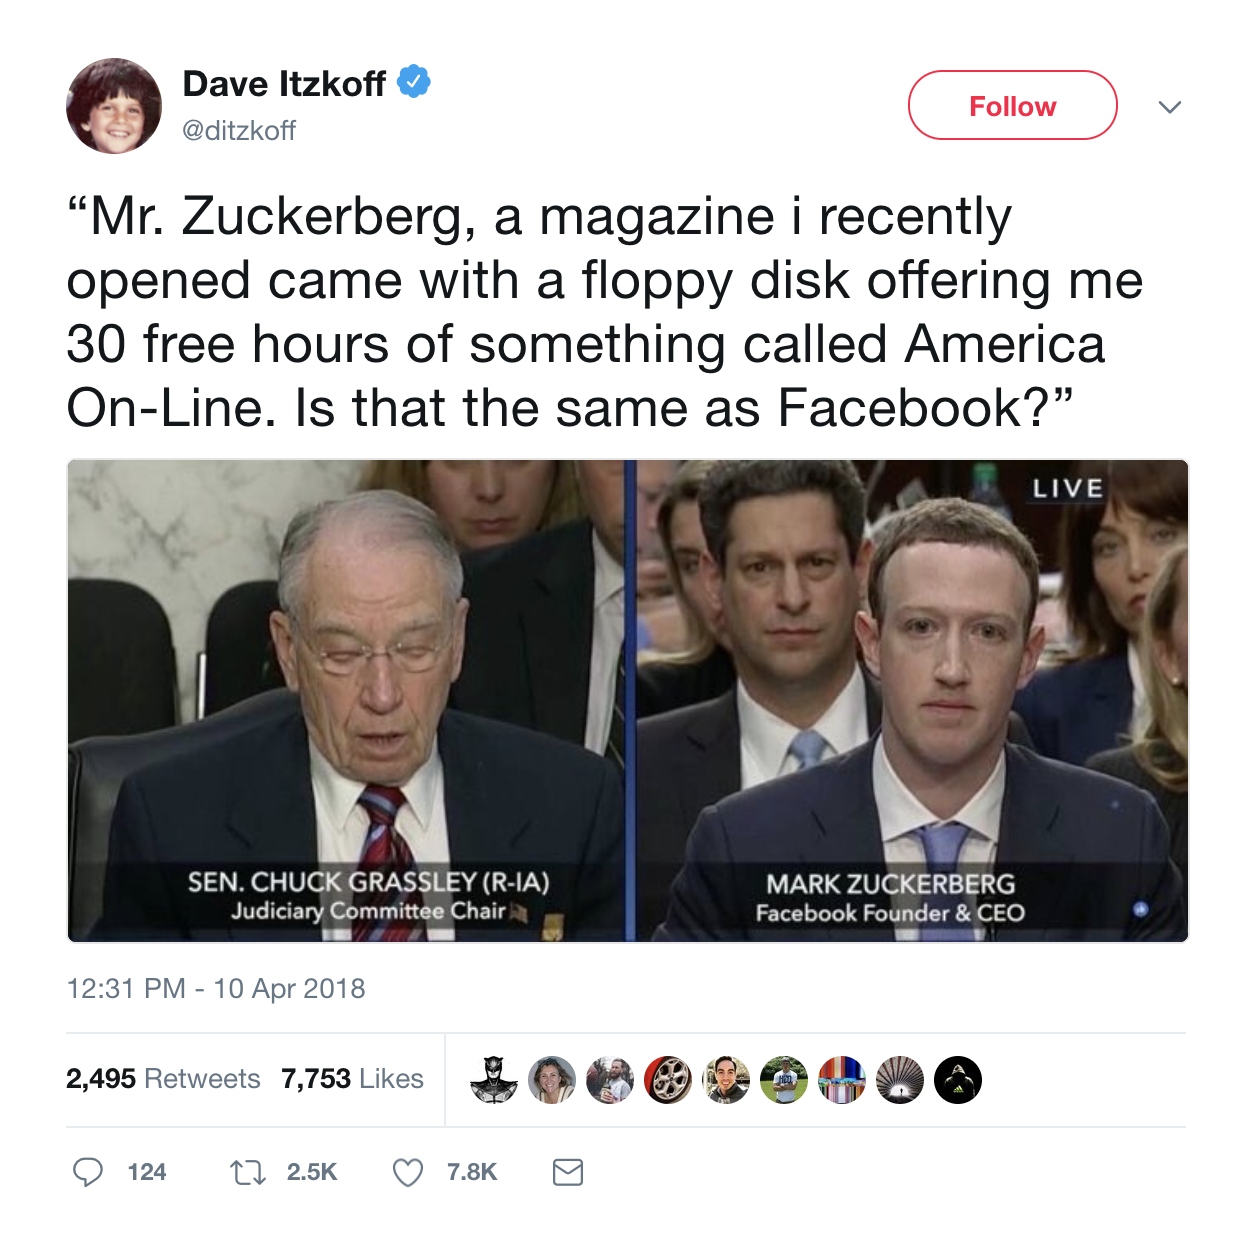 zuckerberg robot memes - Dave Itzkoff aditzkoff "Mr. Zuckerberg, a magazine i recently opened came with a floppy disk offering me 30 free hours of something called America OnLine. Is that the same as Facebook?" Live Sen. Chuck Grassley RIa Judiciary Commi